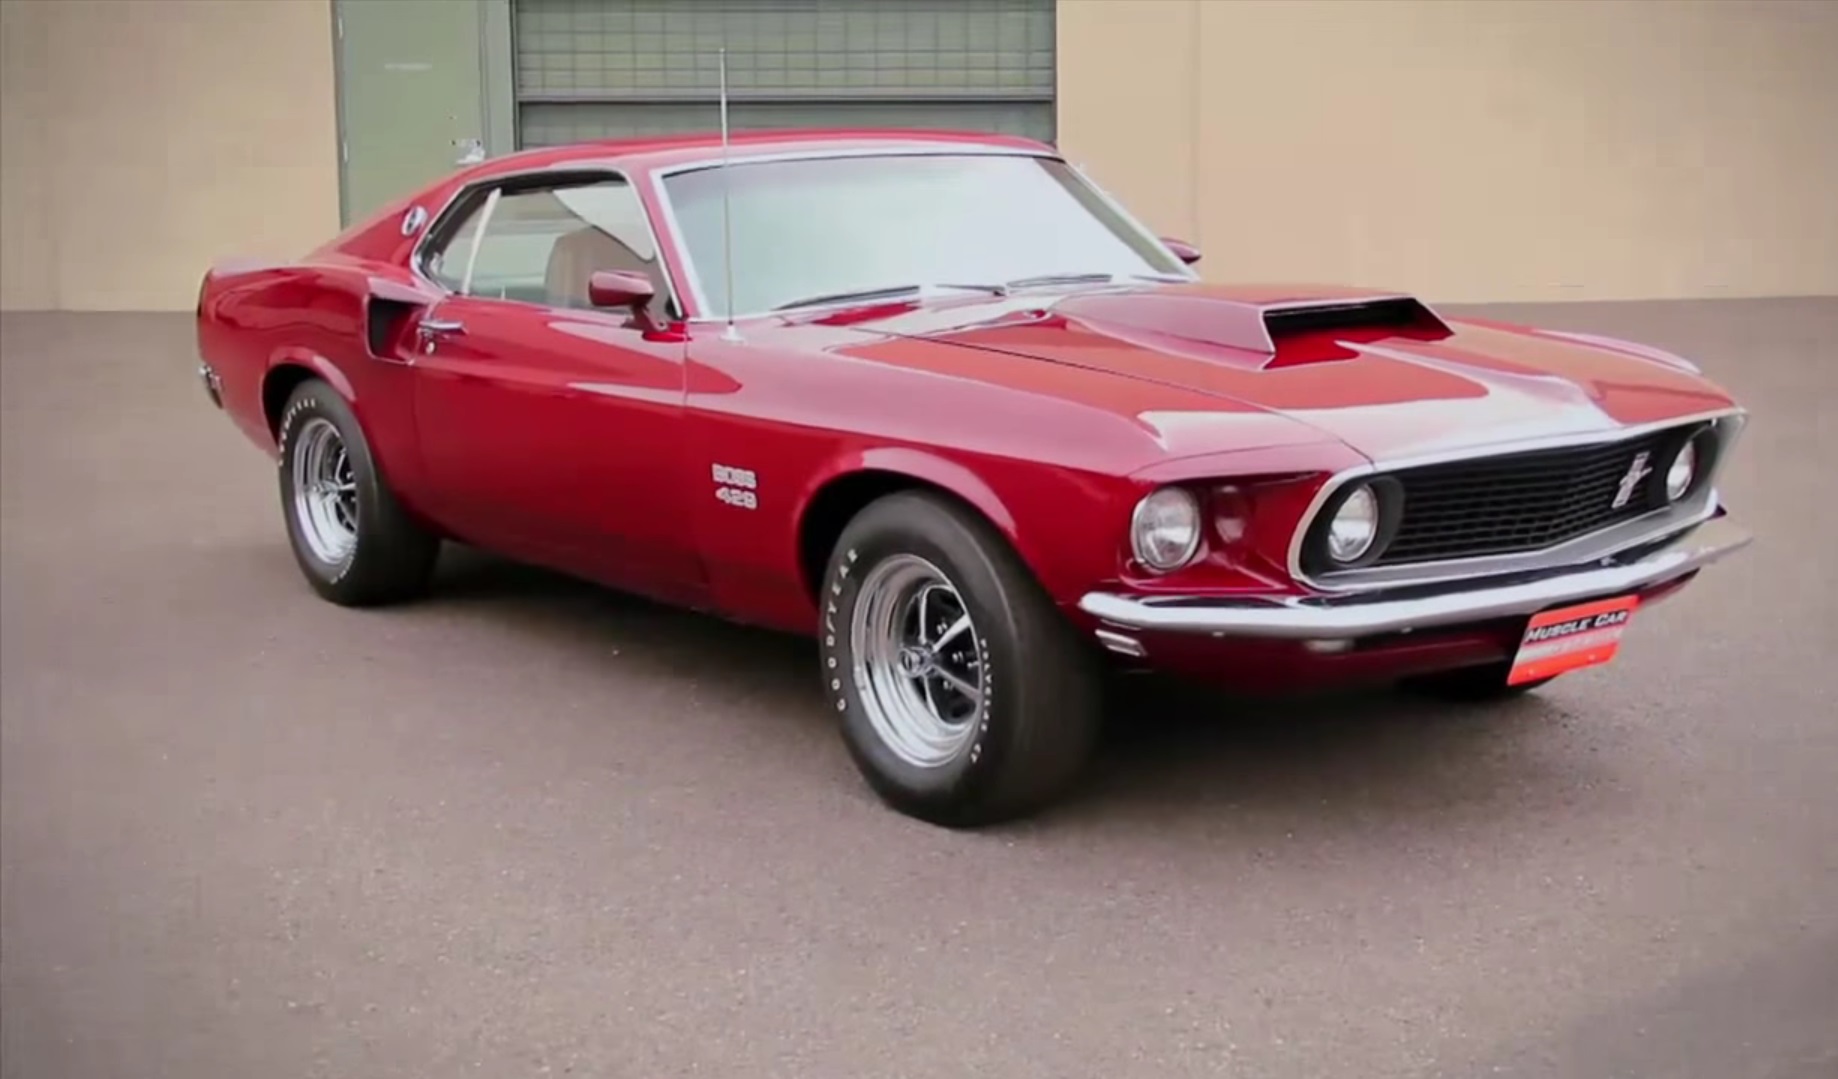 How Did The 1969 Ford Mustang Boss 429 Became A Legendary Muscle Car?